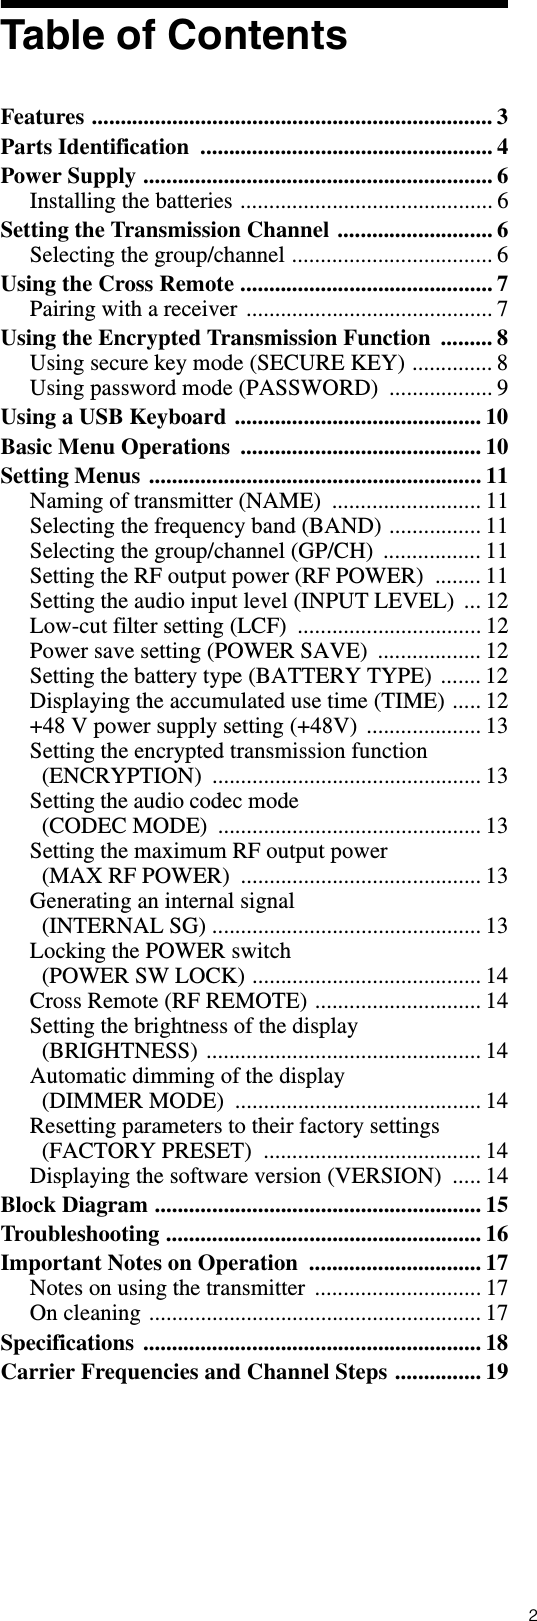 2Table of ContentsFeatures ...................................................................... 3Parts Identification  ................................................... 4Power Supply ............................................................. 6Installing the batteries ............................................ 6Setting the Transmission Channel ........................... 6Selecting the group/channel ................................... 6Using the Cross Remote ............................................ 7Pairing with a receiver ........................................... 7Using the Encrypted Transmission Function  ......... 8Using secure key mode (SECURE KEY) .............. 8Using password mode (PASSWORD)  .................. 9Using a USB Keyboard ........................................... 10Basic Menu Operations  .......................................... 10Setting Menus .......................................................... 11Naming of transmitter (NAME)  .......................... 11Selecting the frequency band (BAND) ................ 11Selecting the group/channel (GP/CH)  ................. 11Setting the RF output power (RF POWER)  ........ 11Setting the audio input level (INPUT LEVEL)  ... 12Low-cut filter setting (LCF)  ................................ 12Power save setting (POWER SAVE)  .................. 12Setting the battery type (BATTERY TYPE) ....... 12Displaying the accumulated use time (TIME) ..... 12+48 V power supply setting (+48V)  .................... 13Setting the encrypted transmission function (ENCRYPTION) ............................................... 13Setting the audio codec mode (CODEC MODE)  .............................................. 13Setting the maximum RF output power (MAX RF POWER)  .......................................... 13Generating an internal signal (INTERNAL SG) ............................................... 13Locking the POWER switch (POWER SW LOCK) ........................................ 14Cross Remote (RF REMOTE) ............................. 14Setting the brightness of the display (BRIGHTNESS) ................................................ 14Automatic dimming of the display (DIMMER MODE)  ........................................... 14Resetting parameters to their factory settings (FACTORY PRESET)  ...................................... 14Displaying the software version (VERSION)  ..... 14Block Diagram ......................................................... 15Troubleshooting ....................................................... 16Important Notes on Operation  .............................. 17Notes on using the transmitter  ............................. 17On cleaning .......................................................... 17Specifications ........................................................... 18Carrier Frequencies and Channel Steps ............... 19